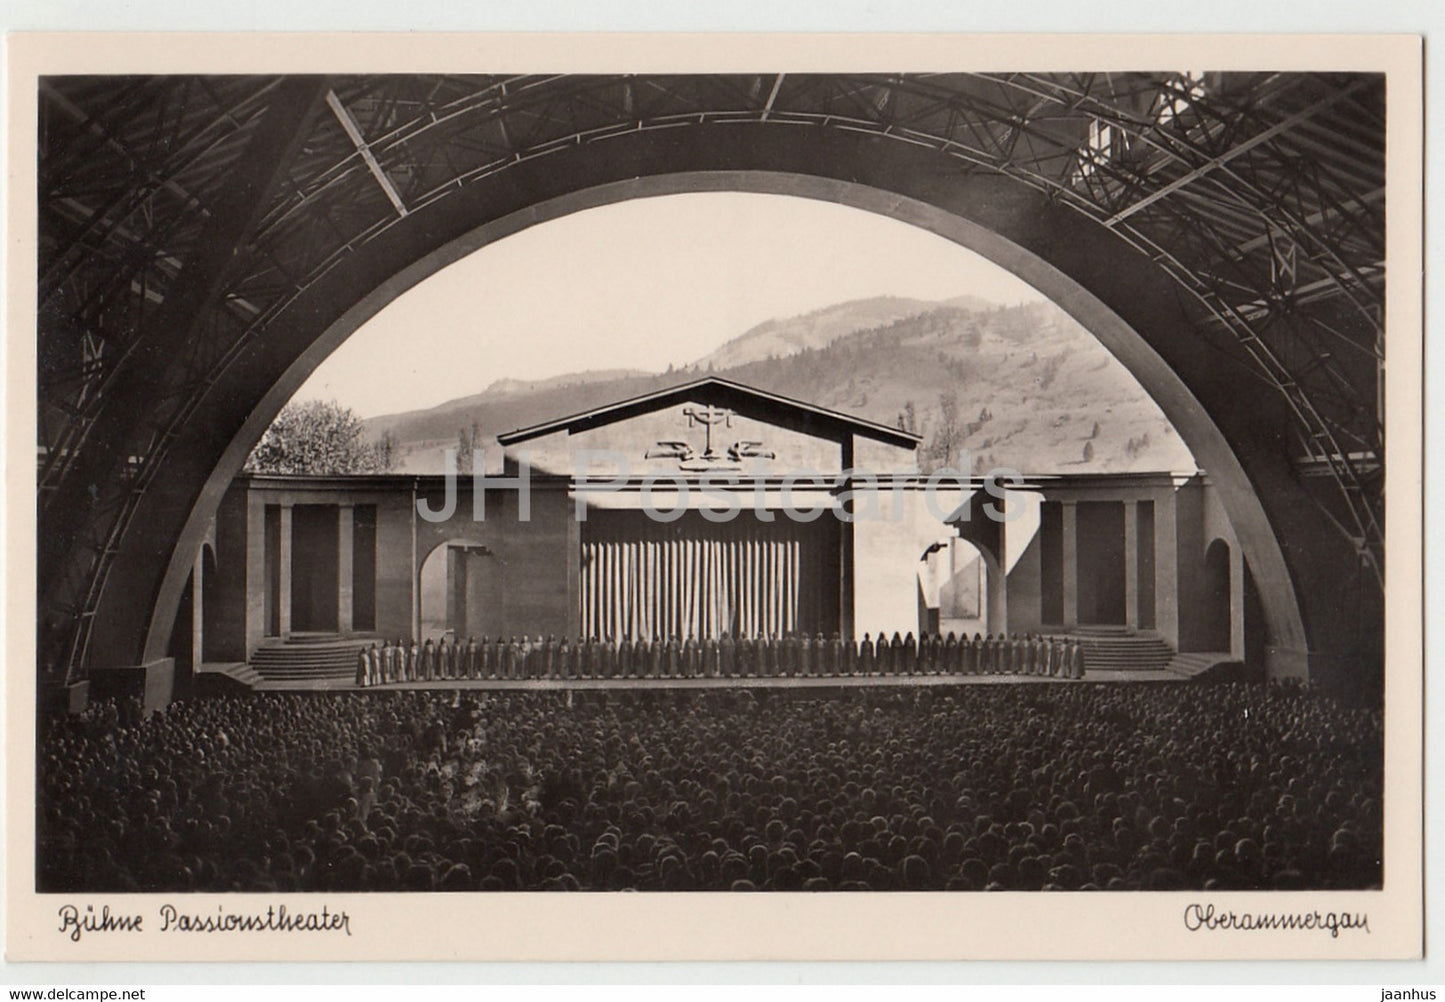 Oberammergau - Buhne Passionstheater - theatre - Germany - unused - JH Postcards